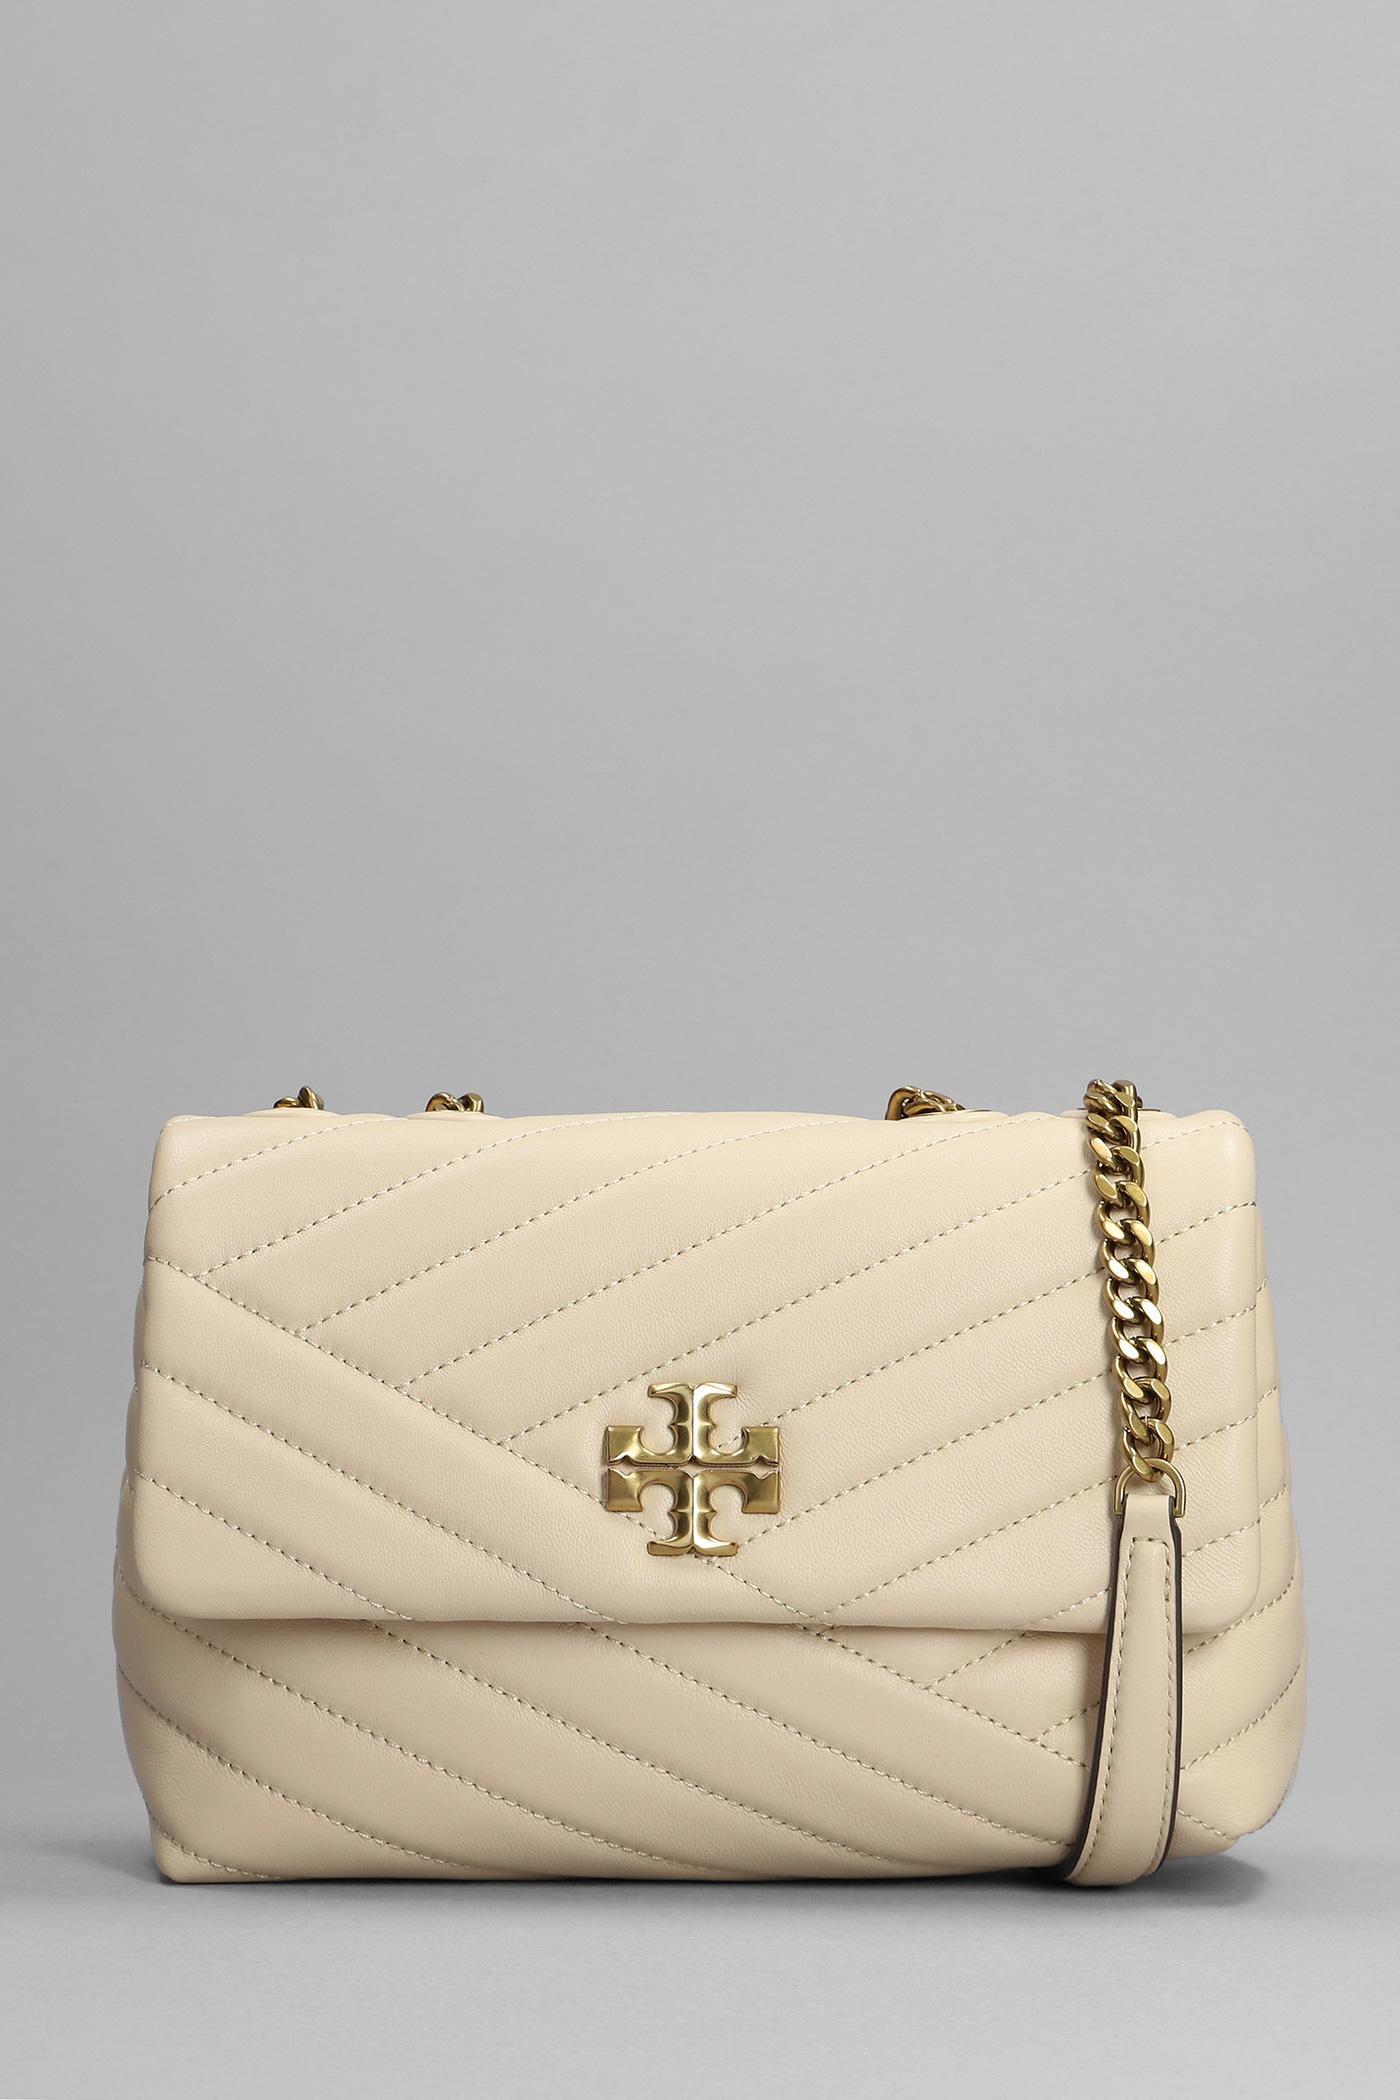 Tory Burch Kira Shoulder Bag In Beige Leather in Natural | Lyst